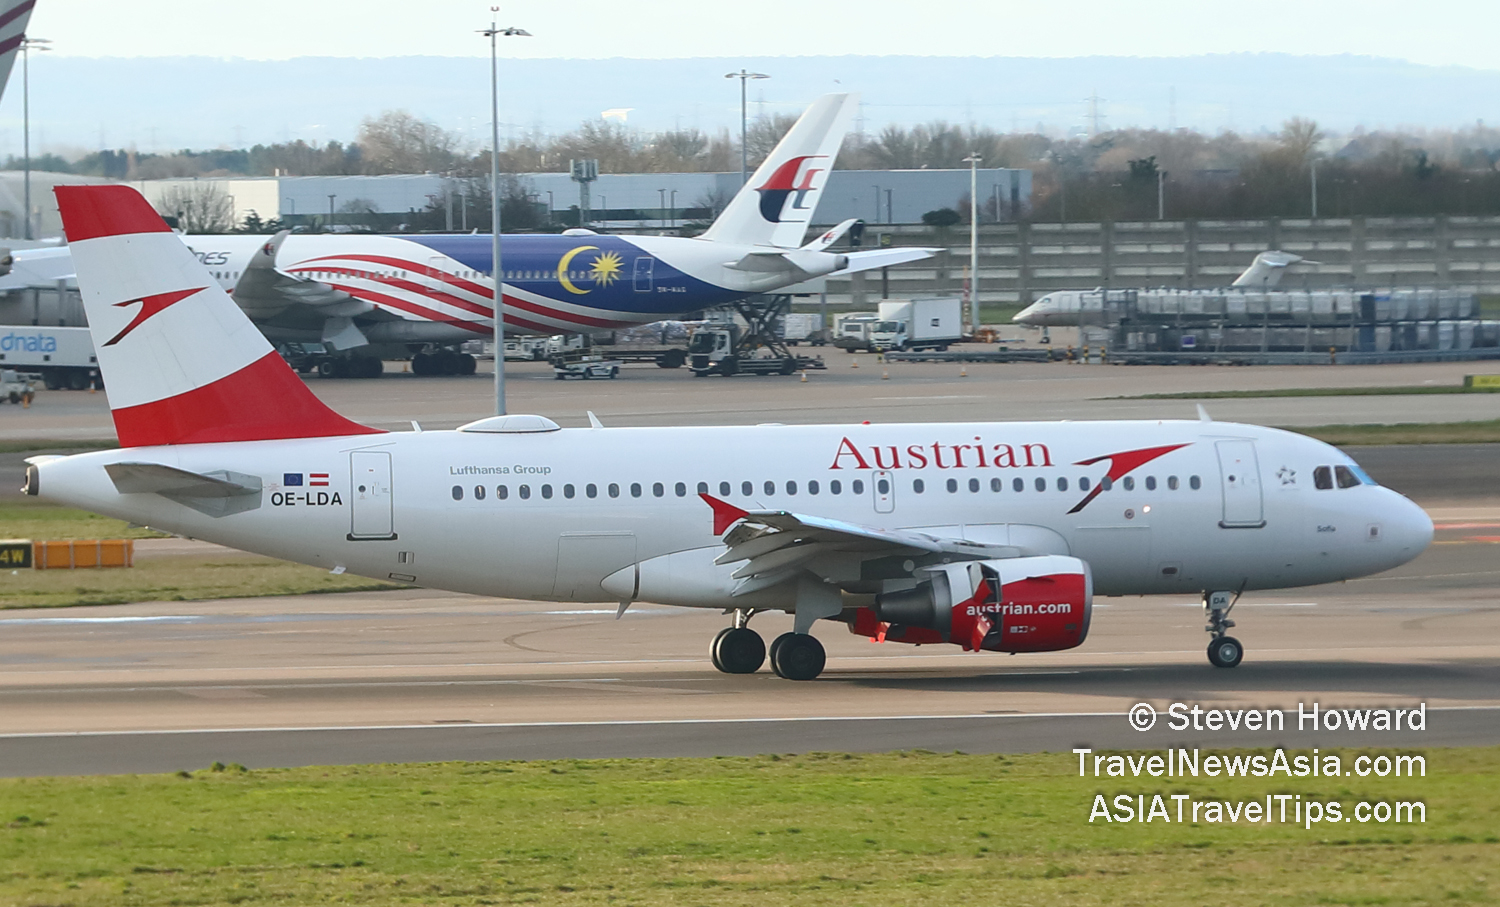 Austrian Airlines Airbus A319 reg: OE-LDA. Picture by Steven Howard of TravelNewsAsia.com. Click to enlarge.